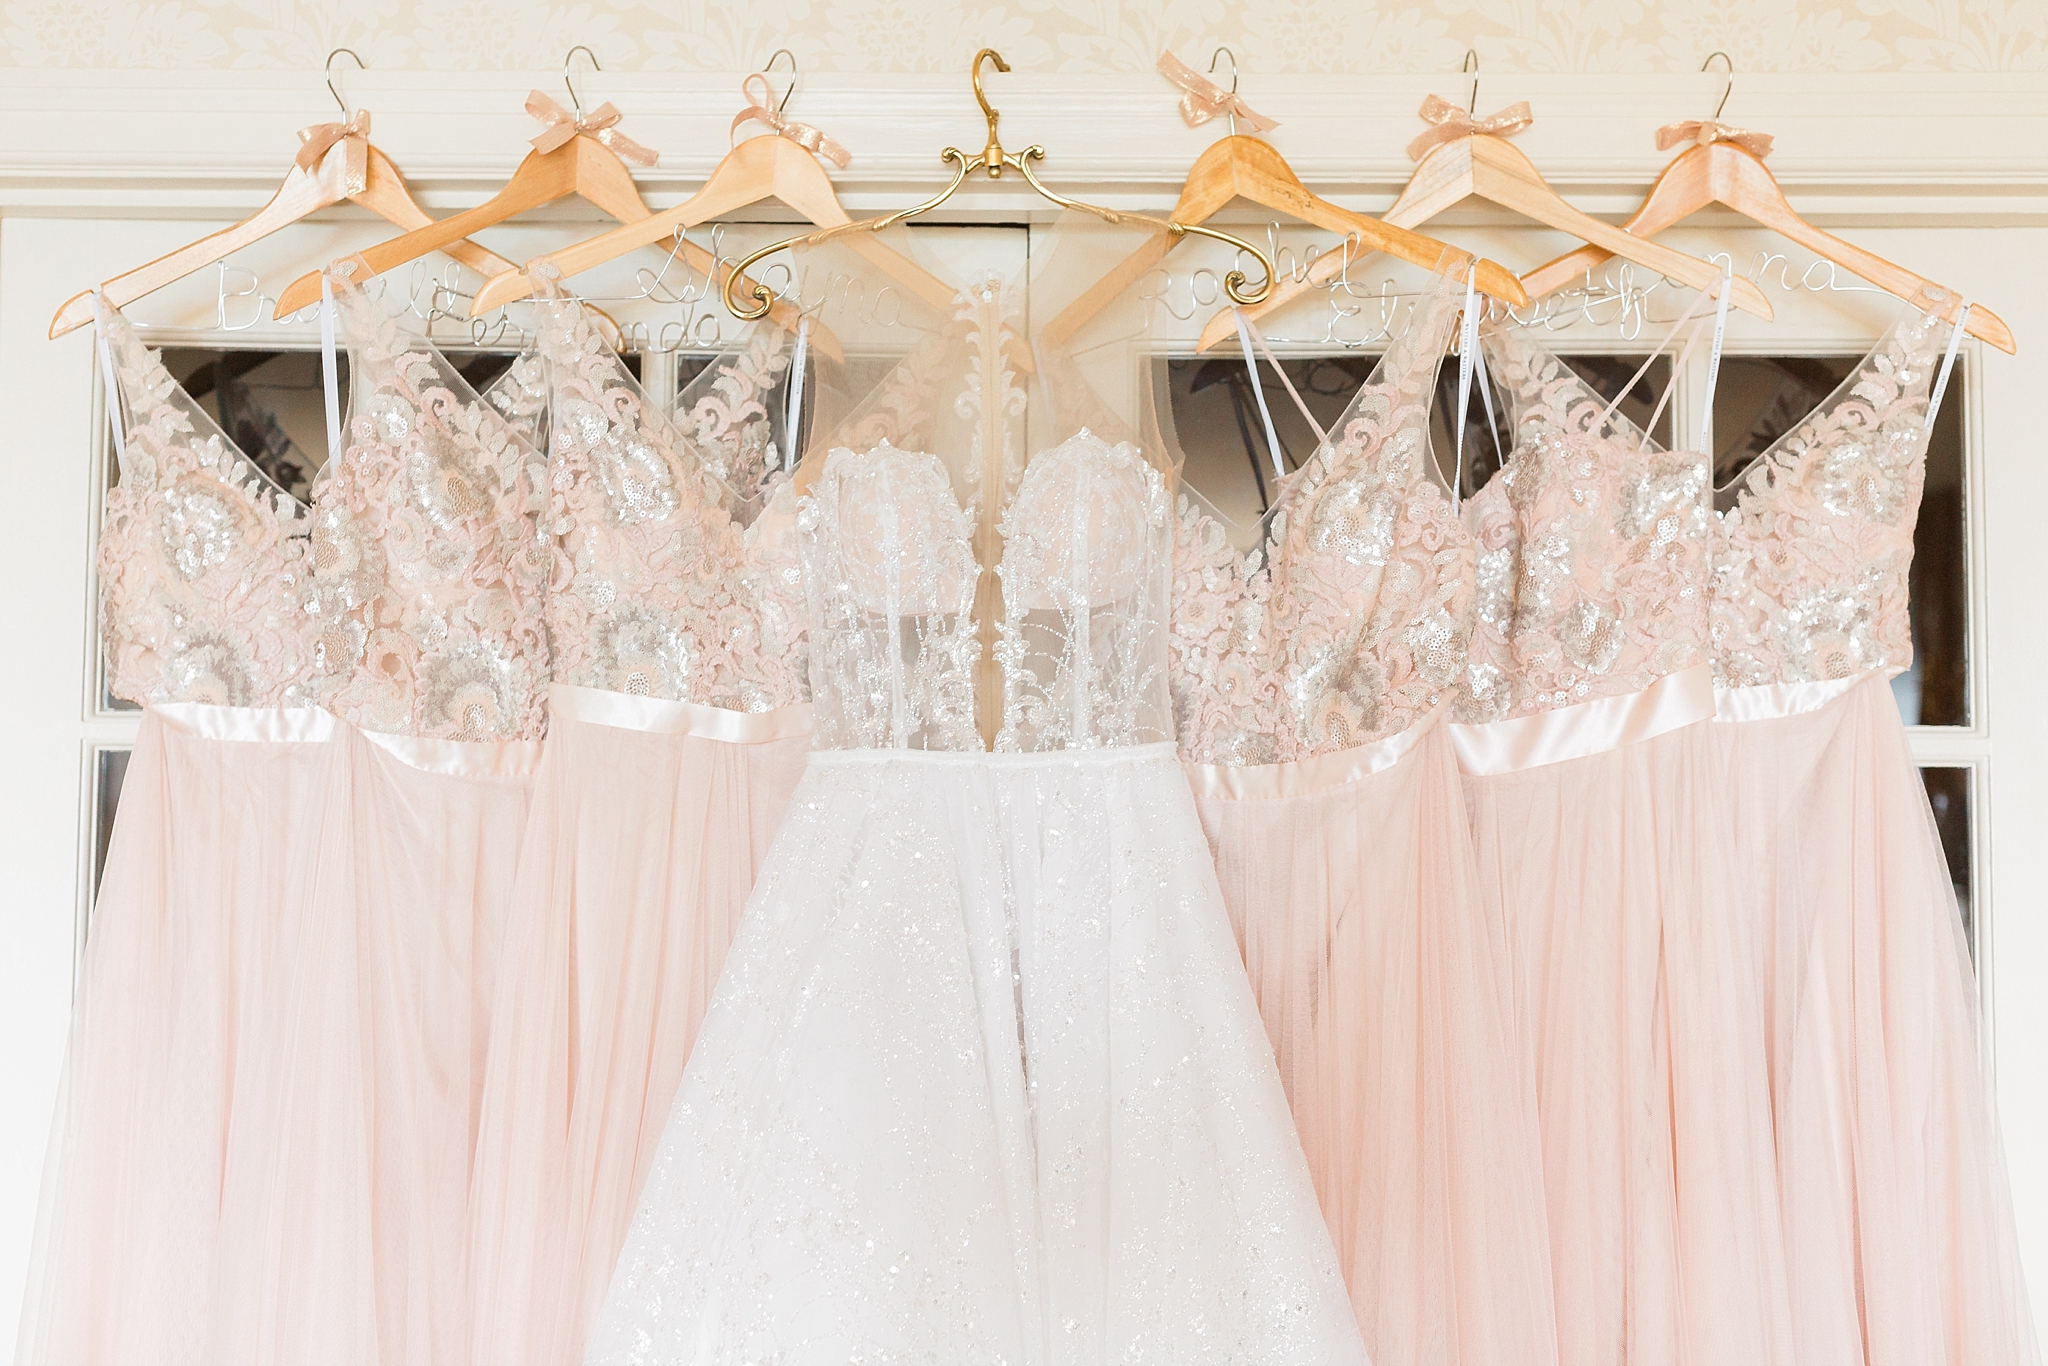 This glamorous summer wedding at the iconic Washington National Cathedral in Washington, DC features a palette of blush and gold.